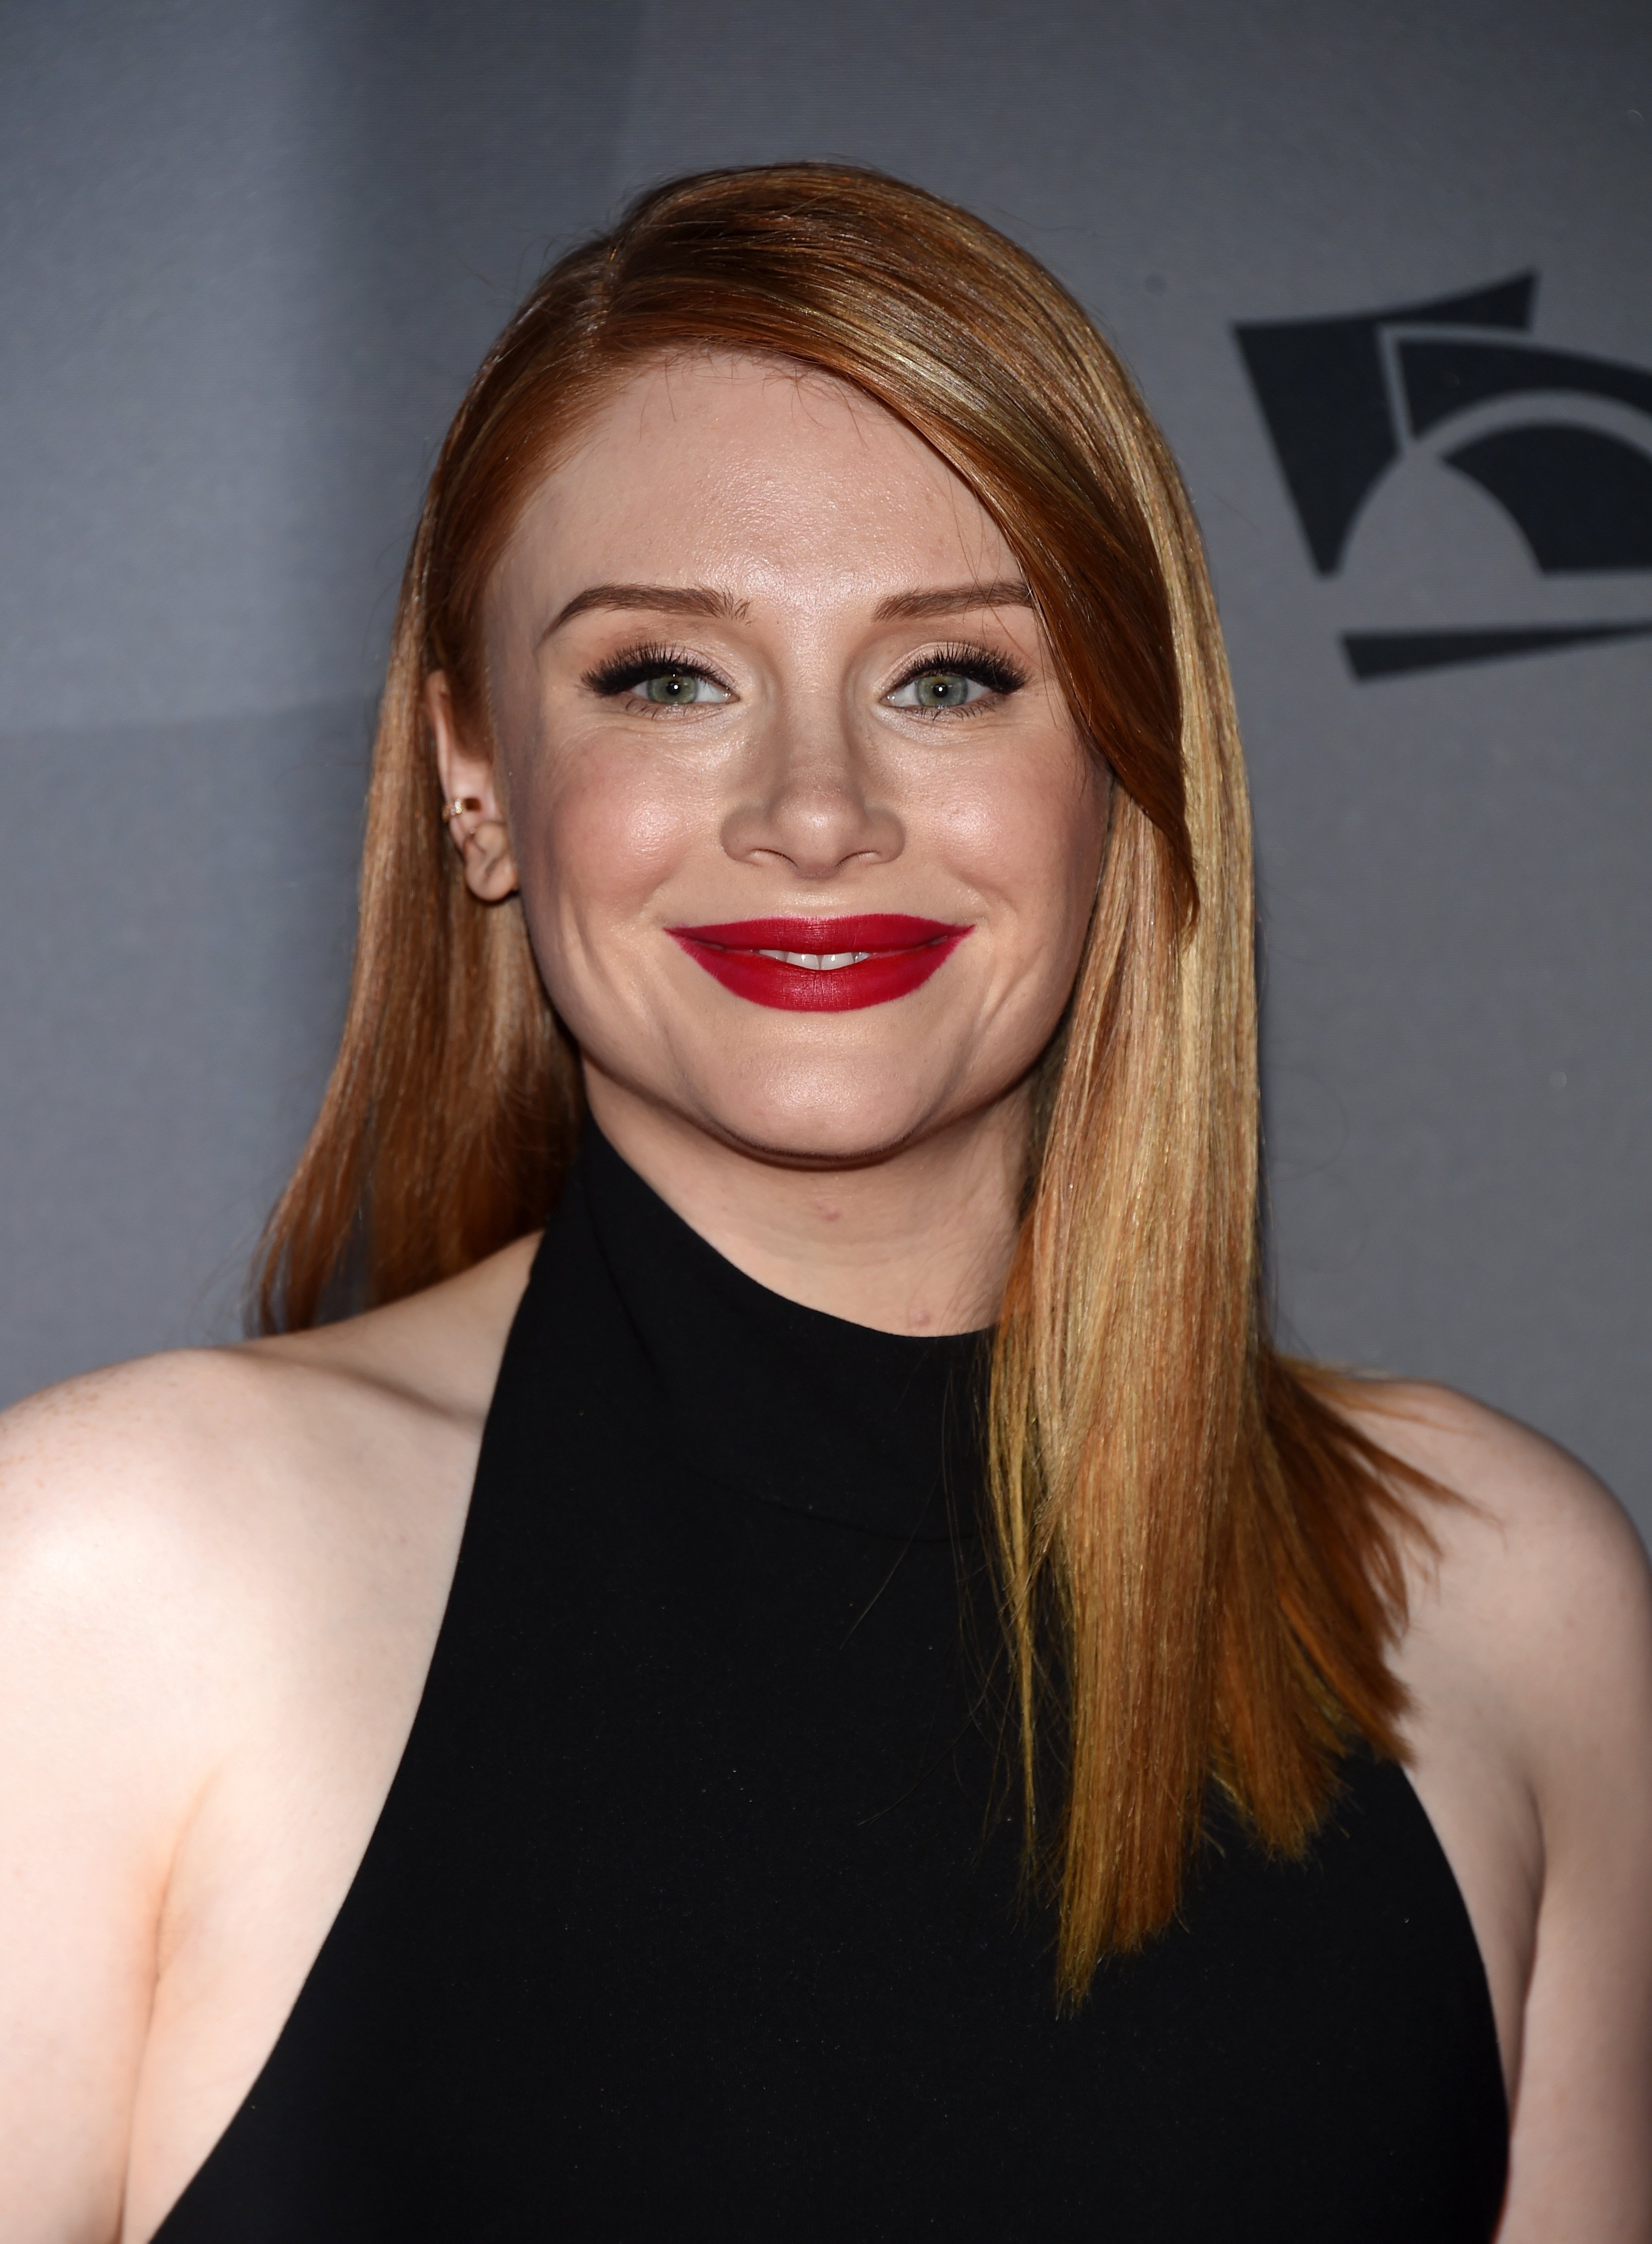 Jean Howard-Gabel Is 'A Person with Kindness' – Facts about Bryce Dallas Howard's Daughter